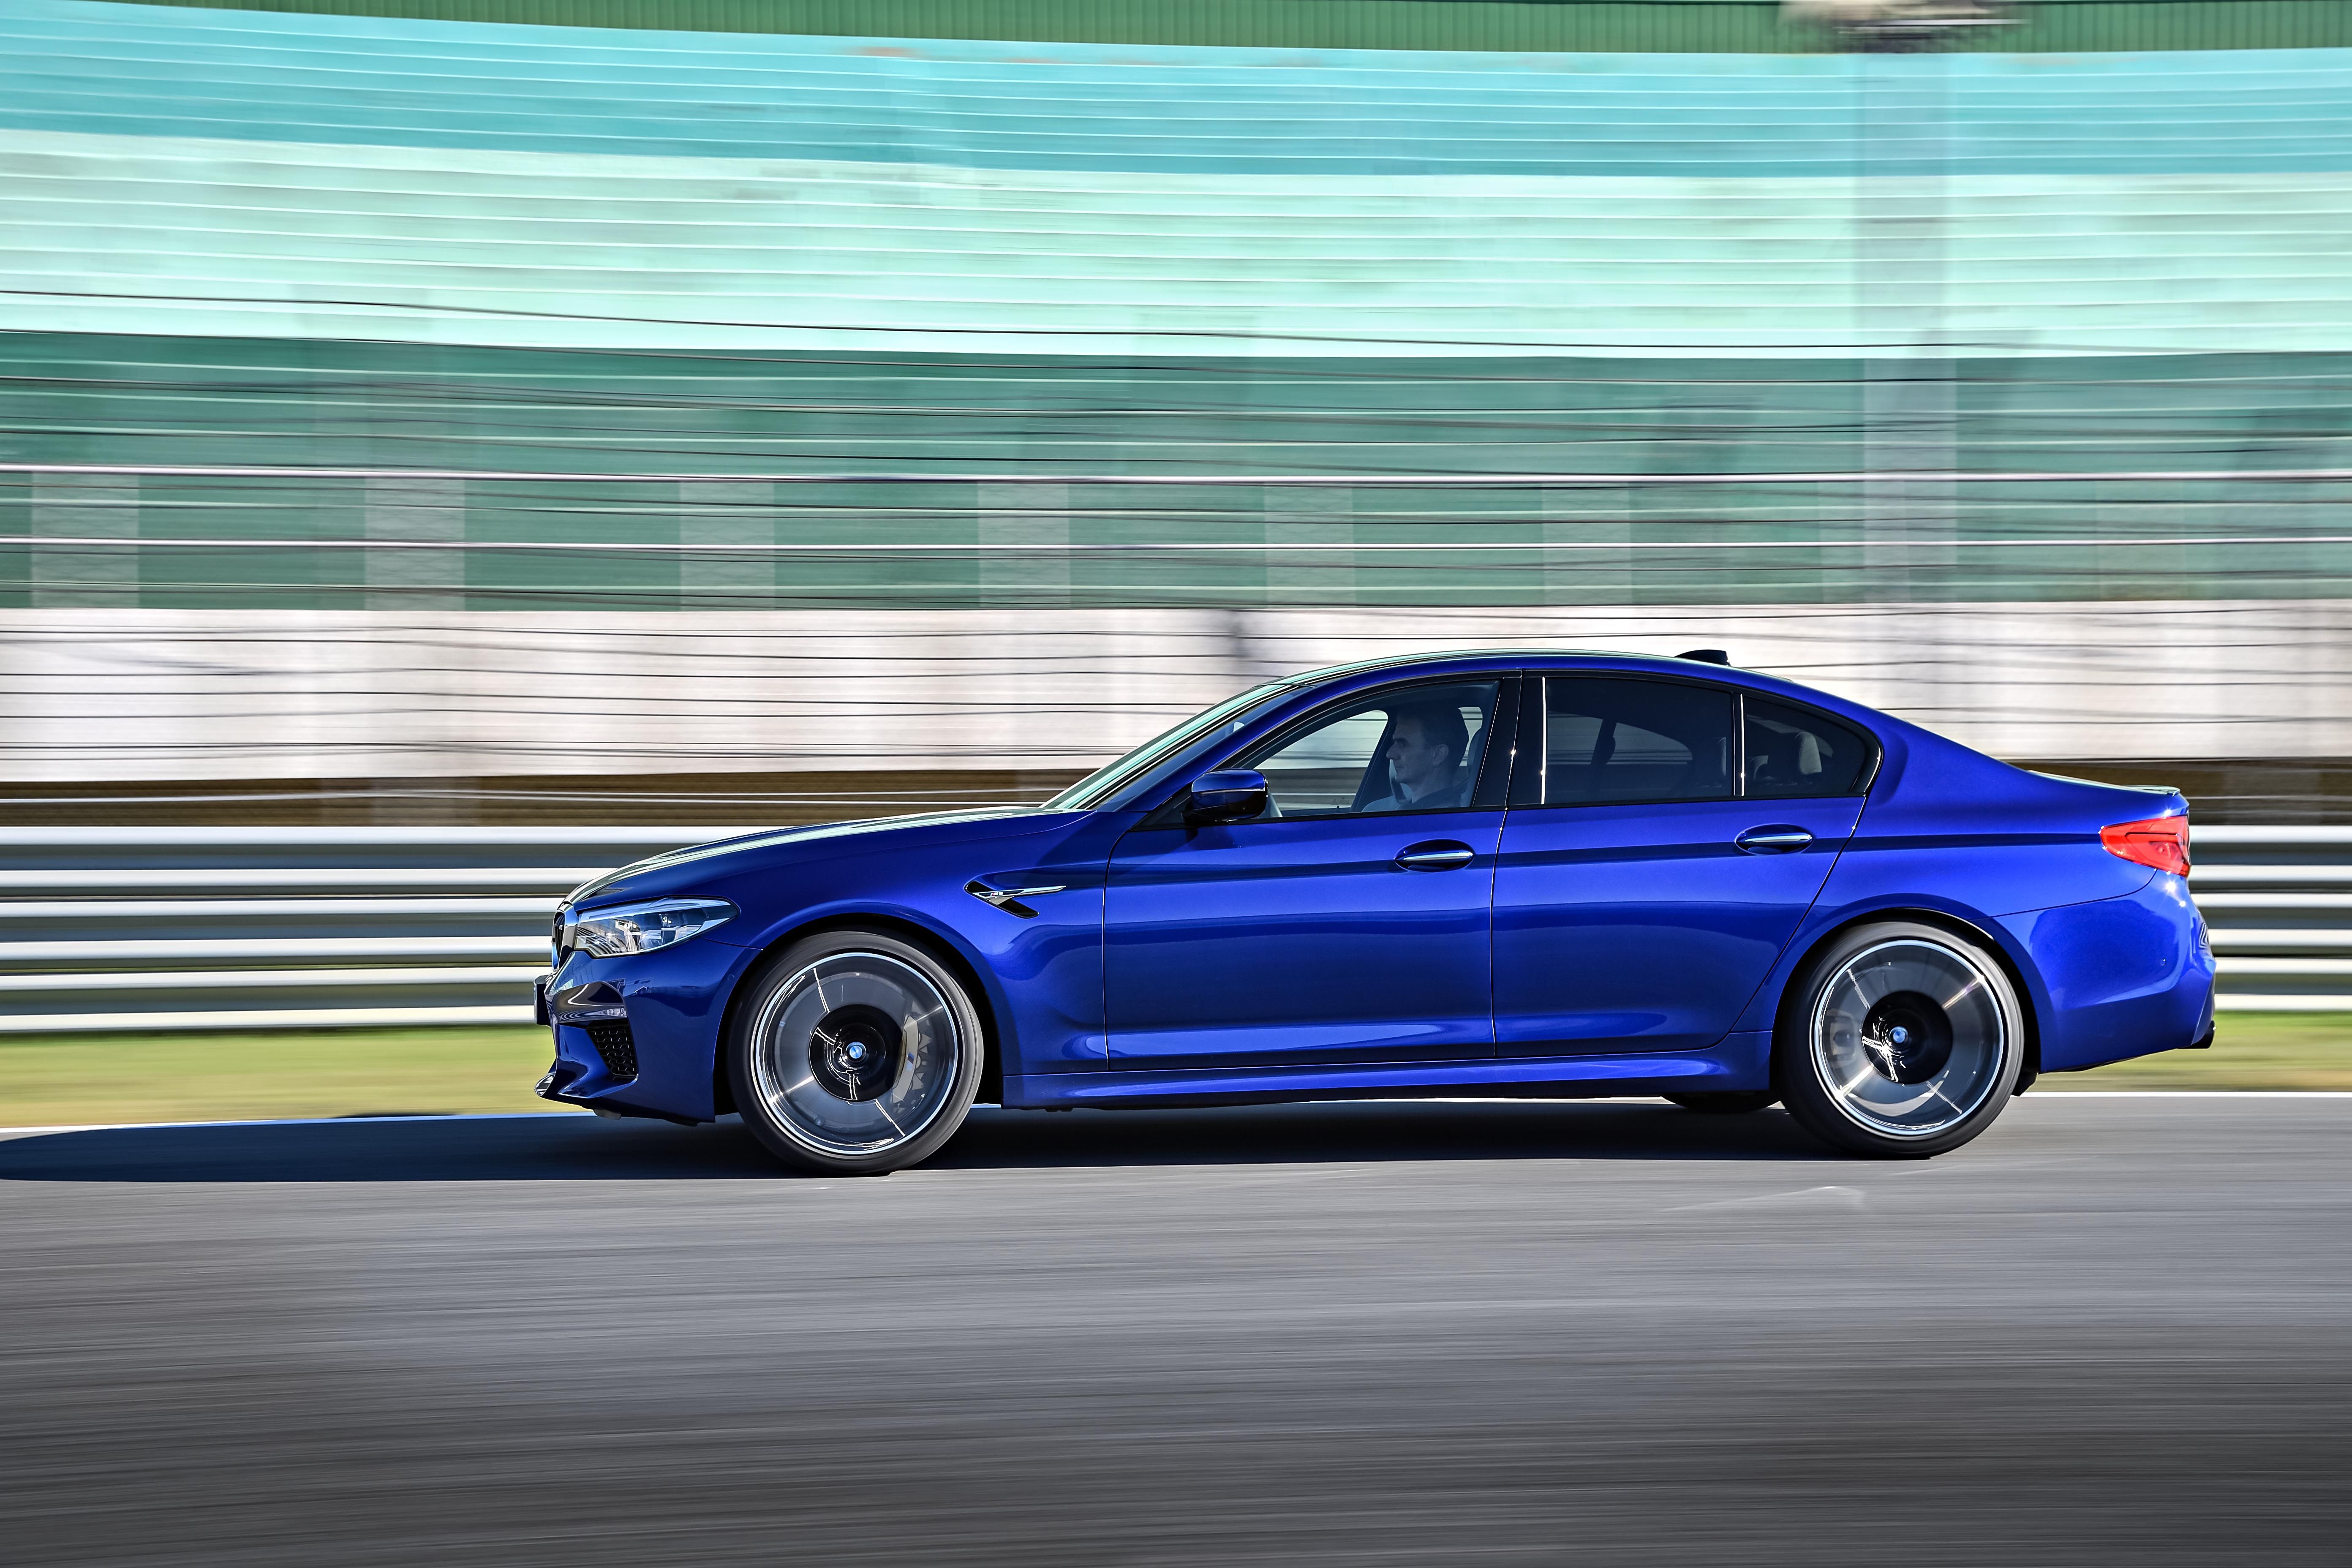 Old Video of the BMW E60 M5 on the Track Shows Why It's so Loved